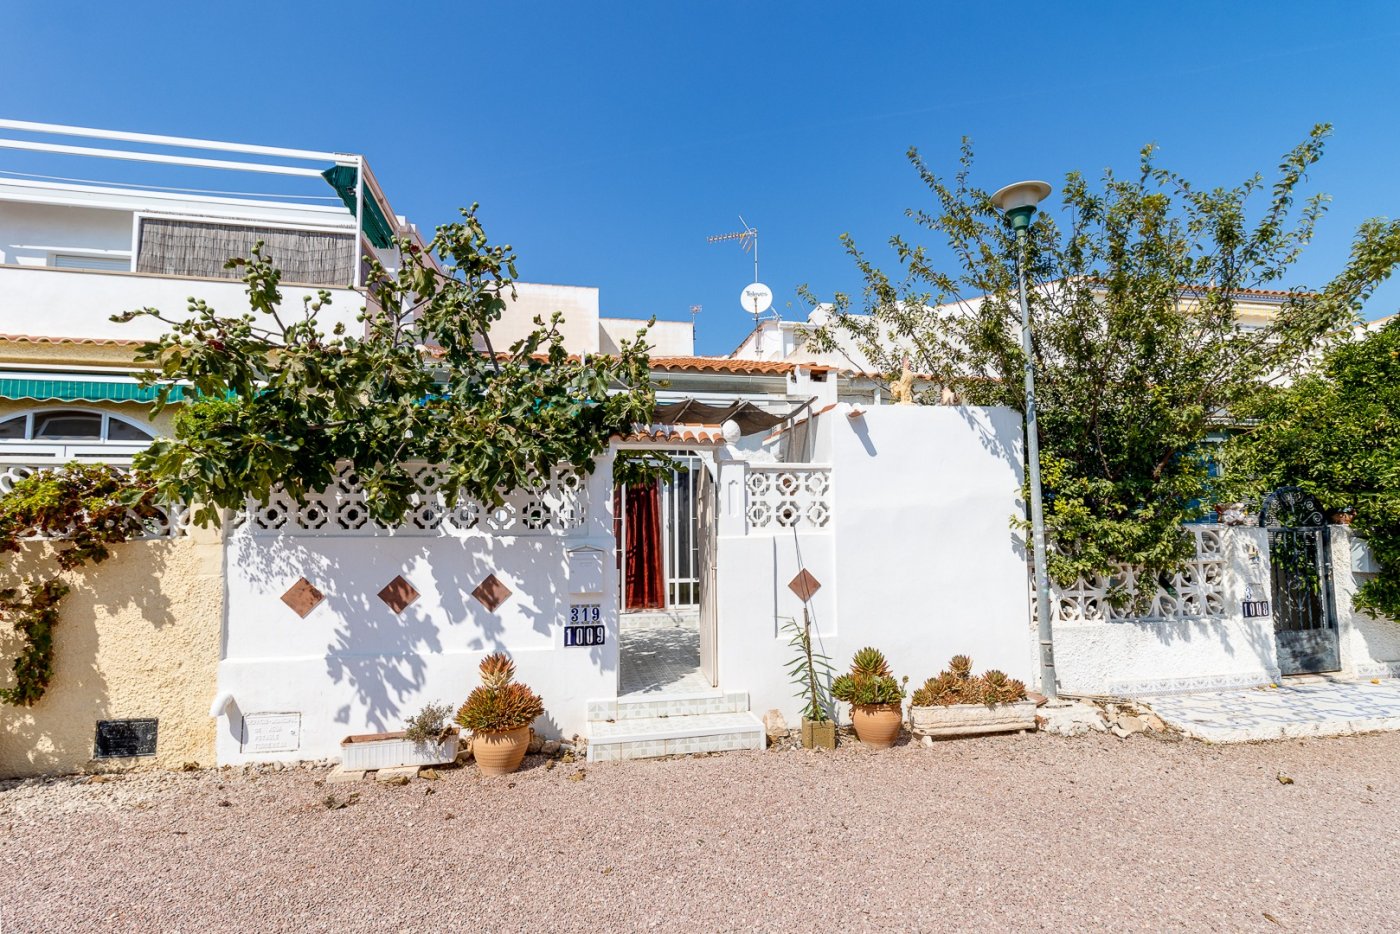 Mediterranean bungalow for sale without neighbors above in a suburb of Torrevieja.